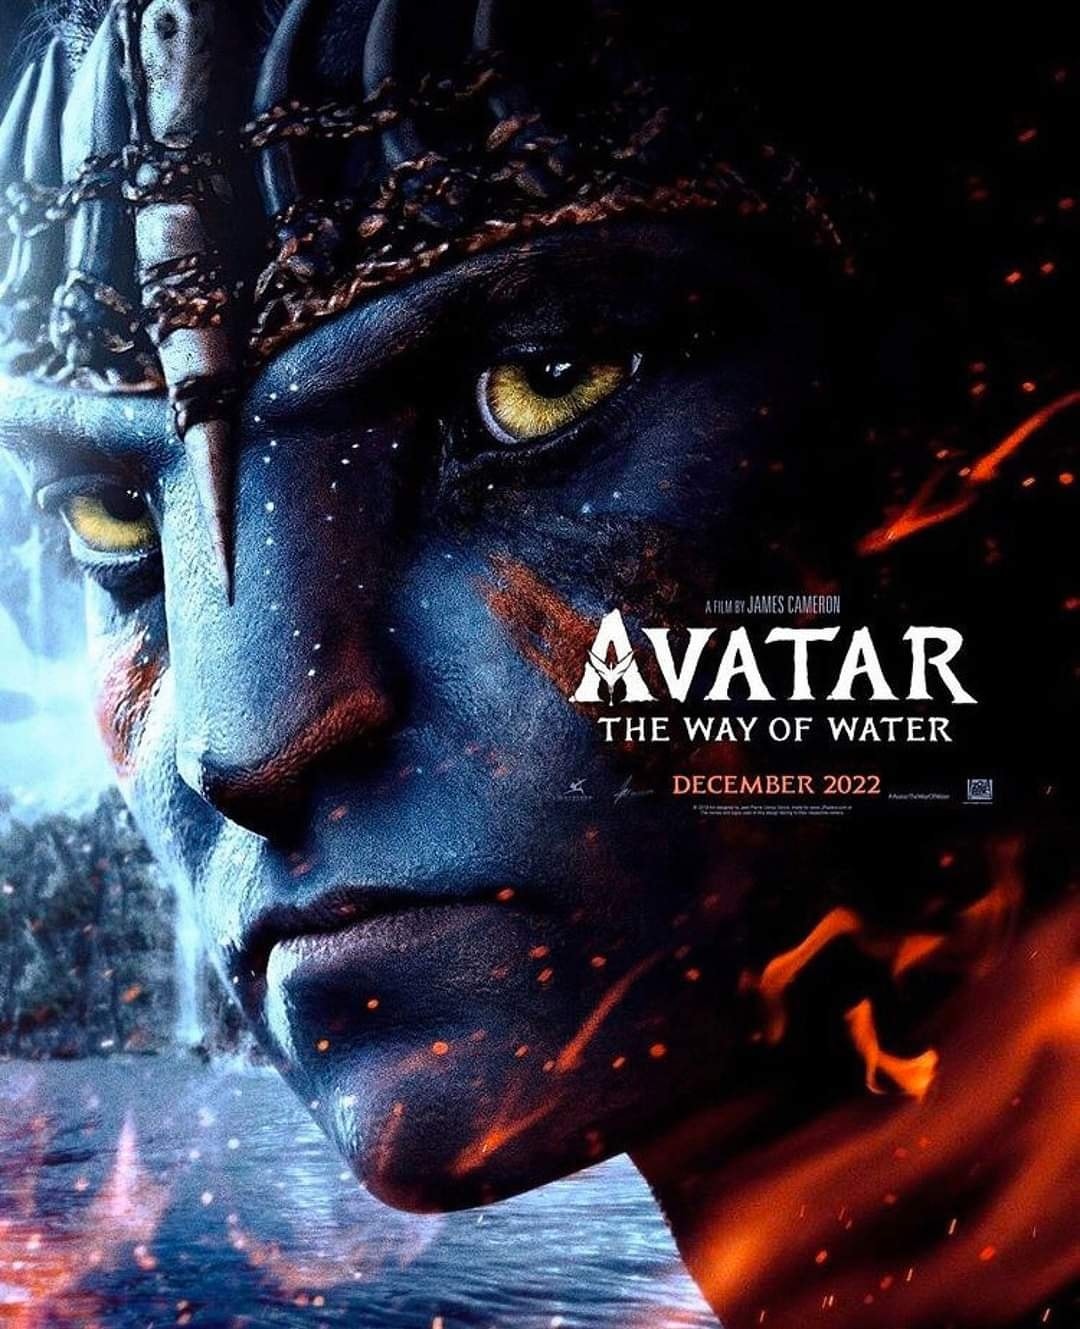 Avatar The Way Of Water Watch The Trailer For The James Cameron